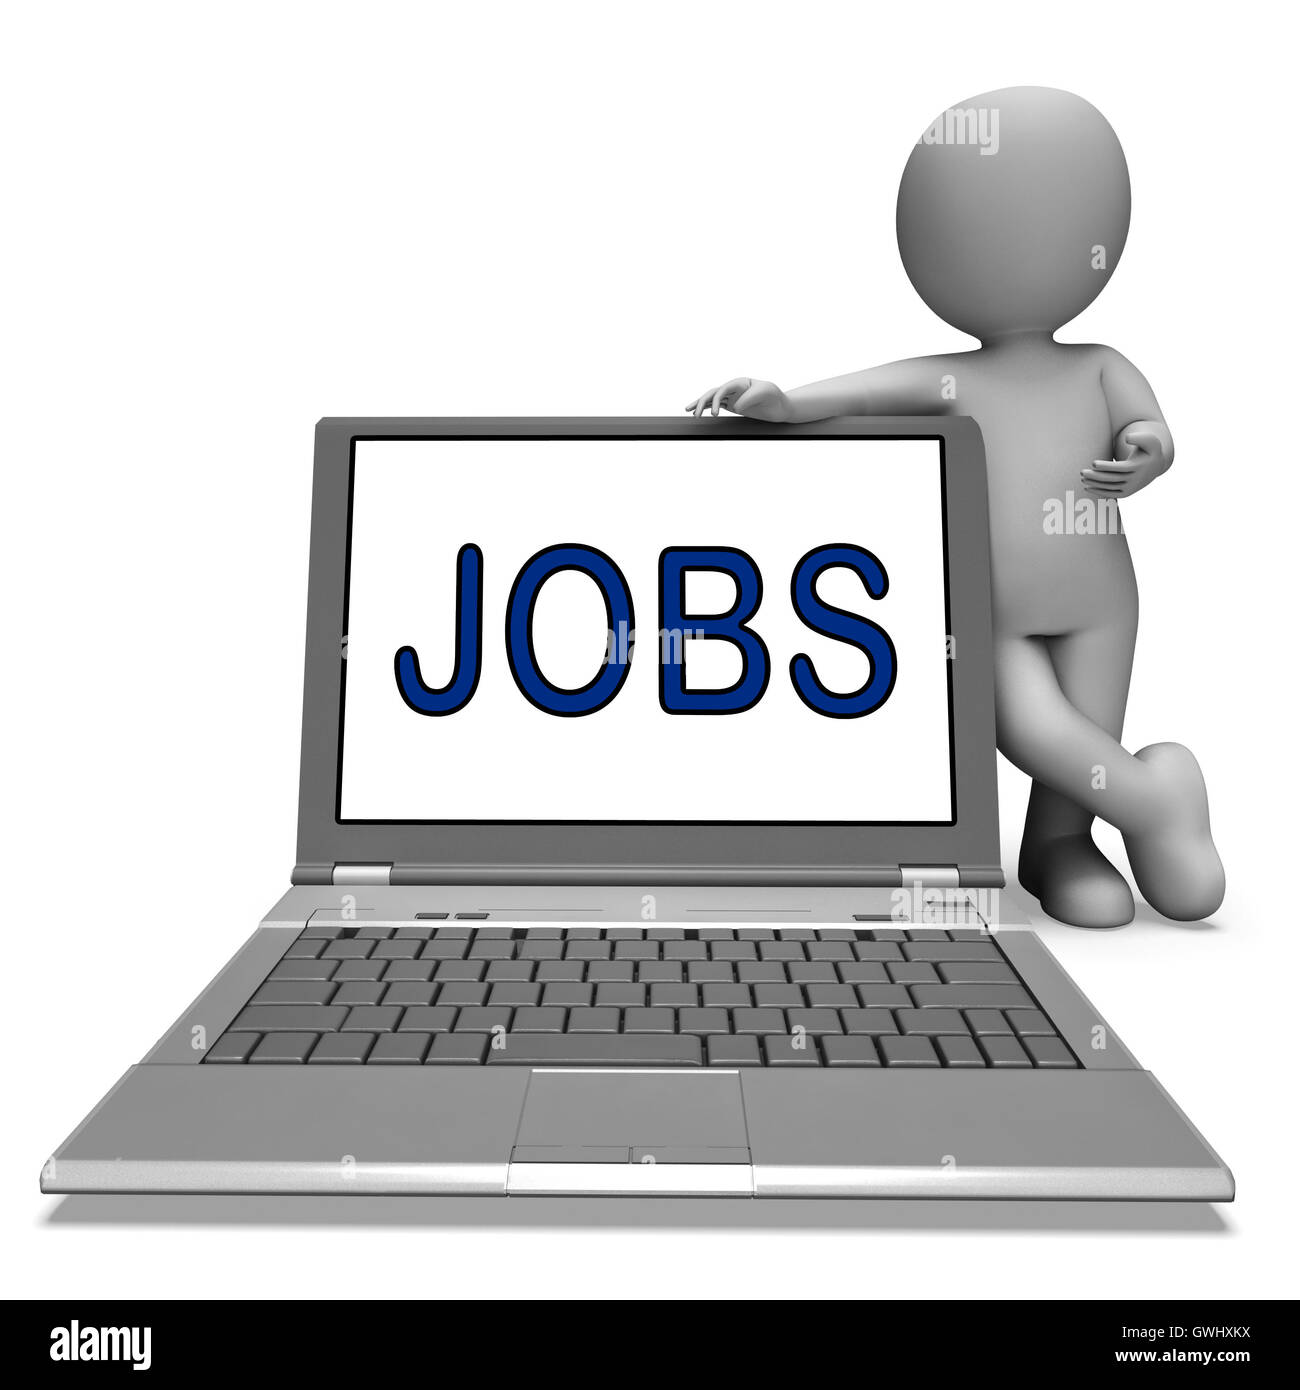 Jobs On Laptop Shows Profession Employment Or Hiring Online Stock Photo